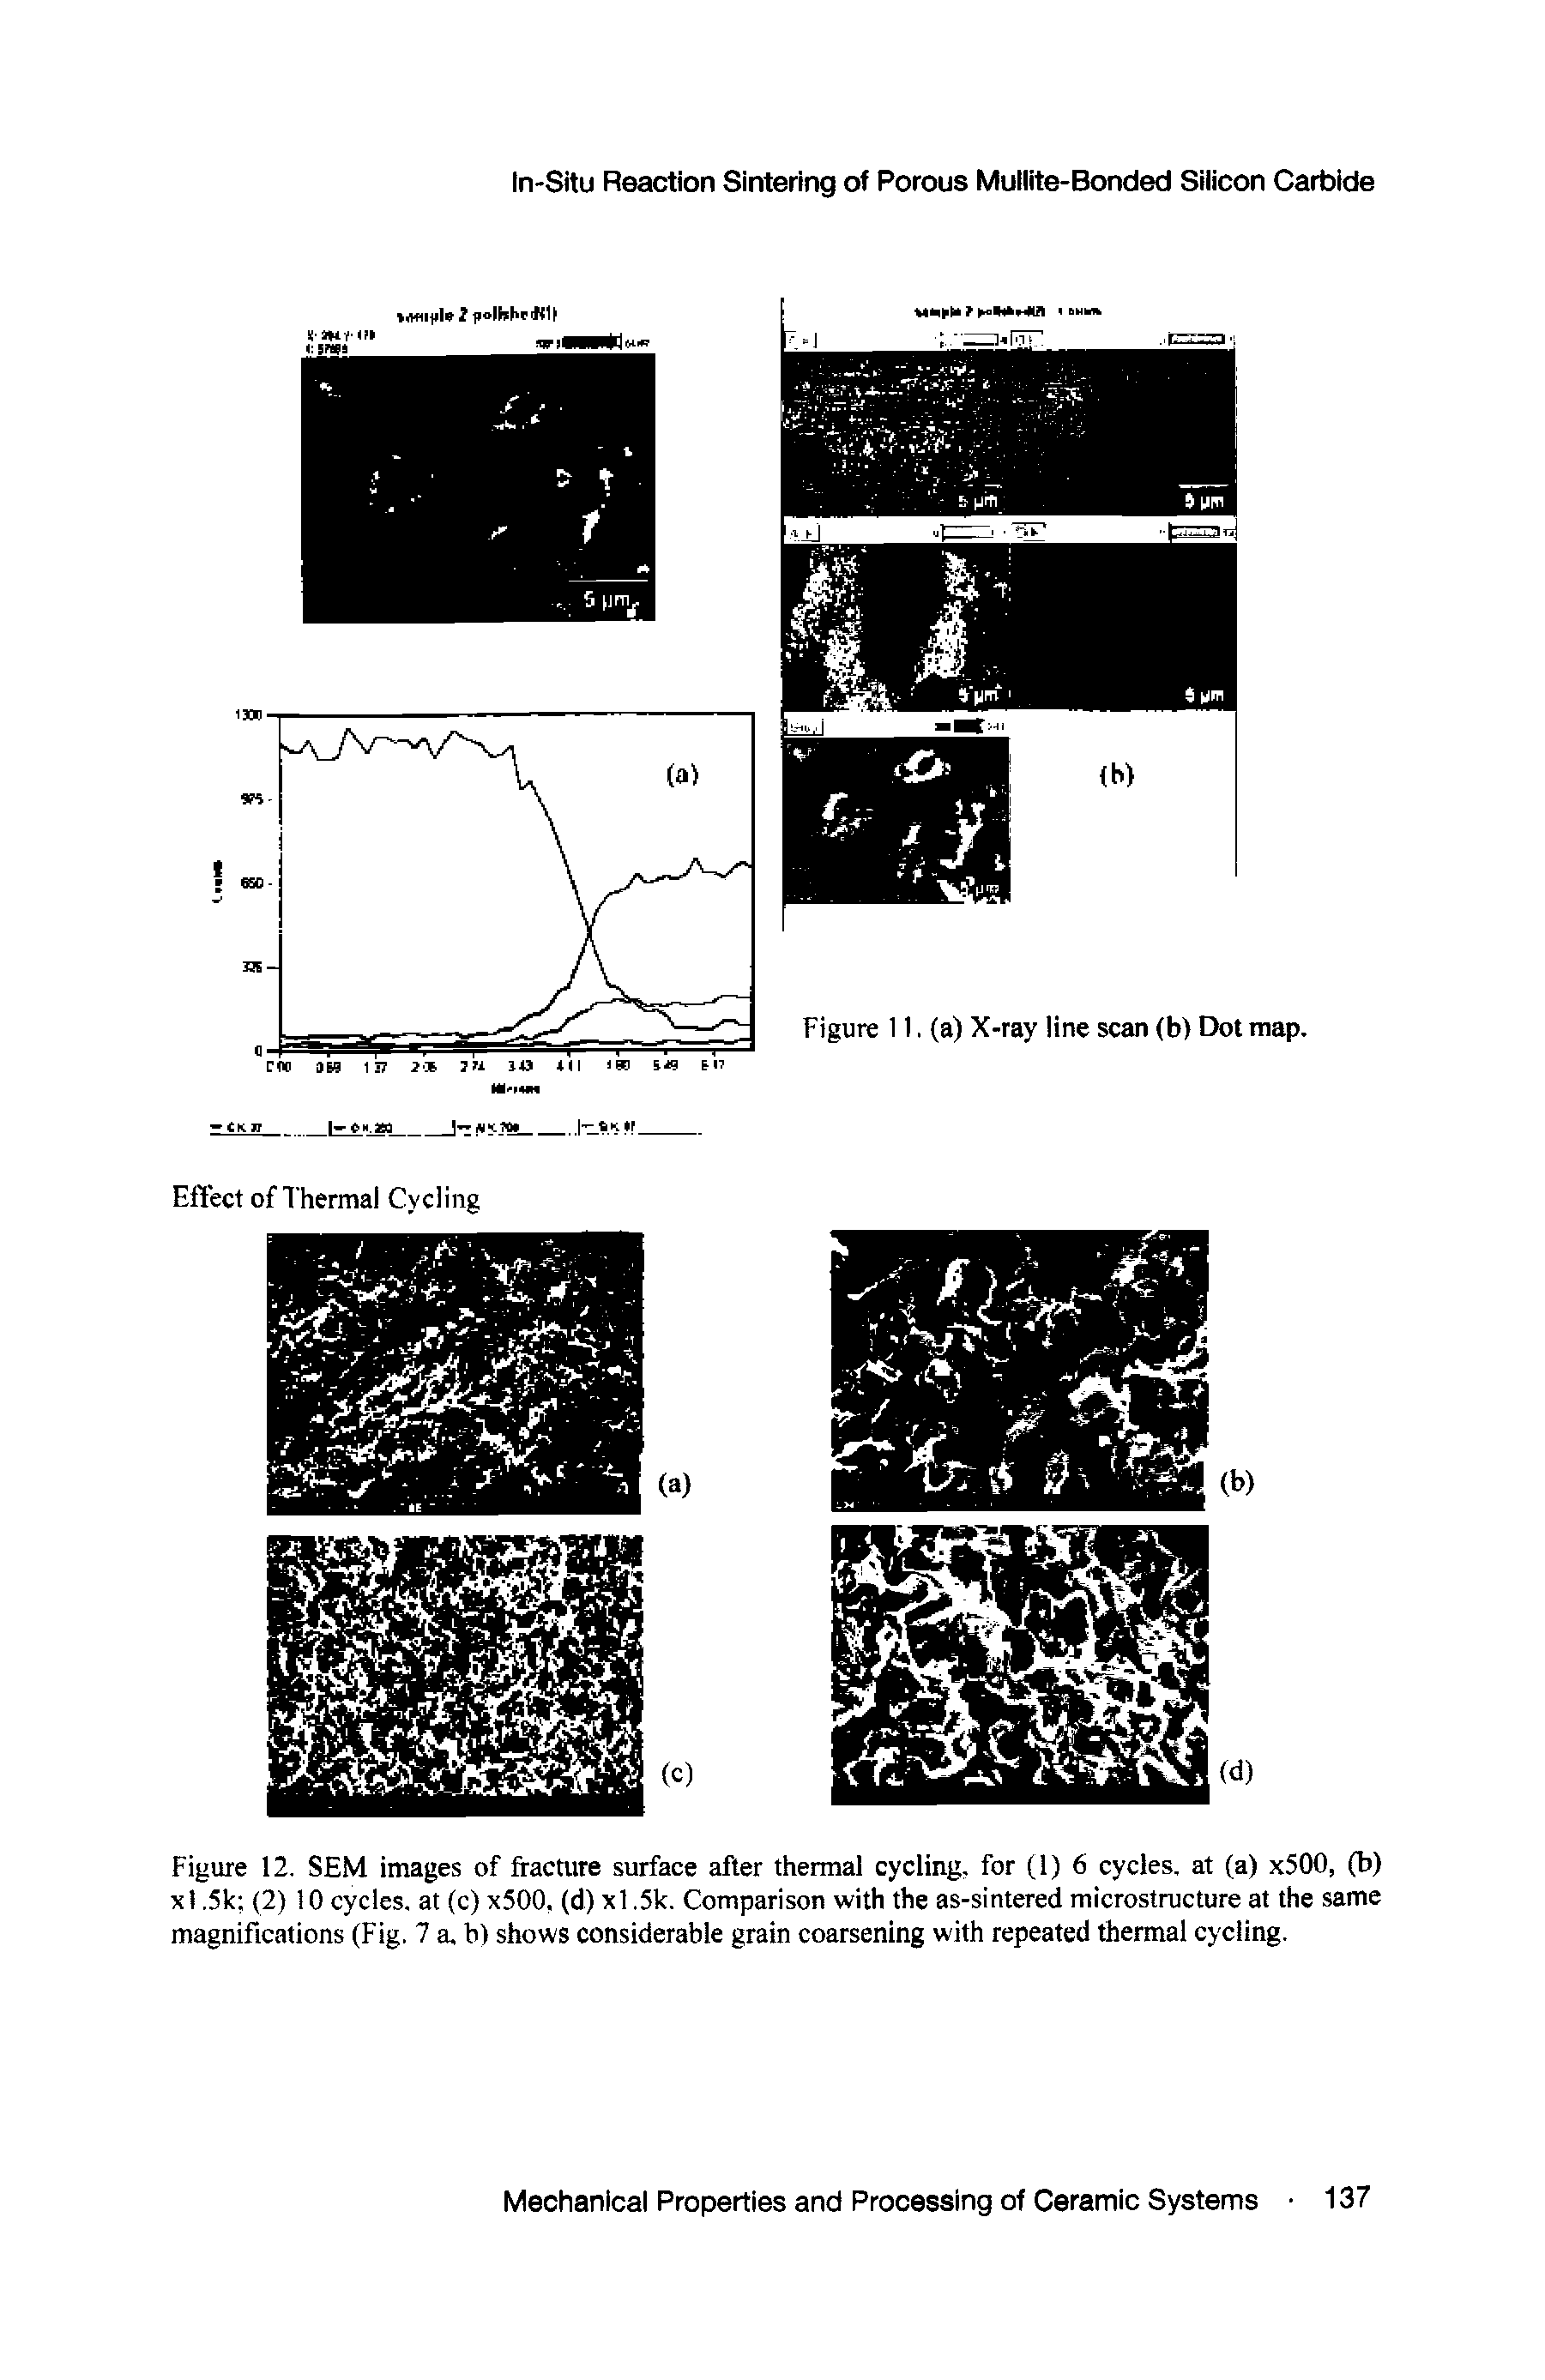 Figure 12. SEM images of fracture surface after thermal cycling, for (1) 6 cycles, at (a) x500, (b) xl.5k (2) 10cycles, at (c) x500, (d) xl.5k. Comparison with the as-sintered microstructure at the same magnifications (Fig. 7 a, b> shows considerable grain coarsening with repeated thermal cycling.